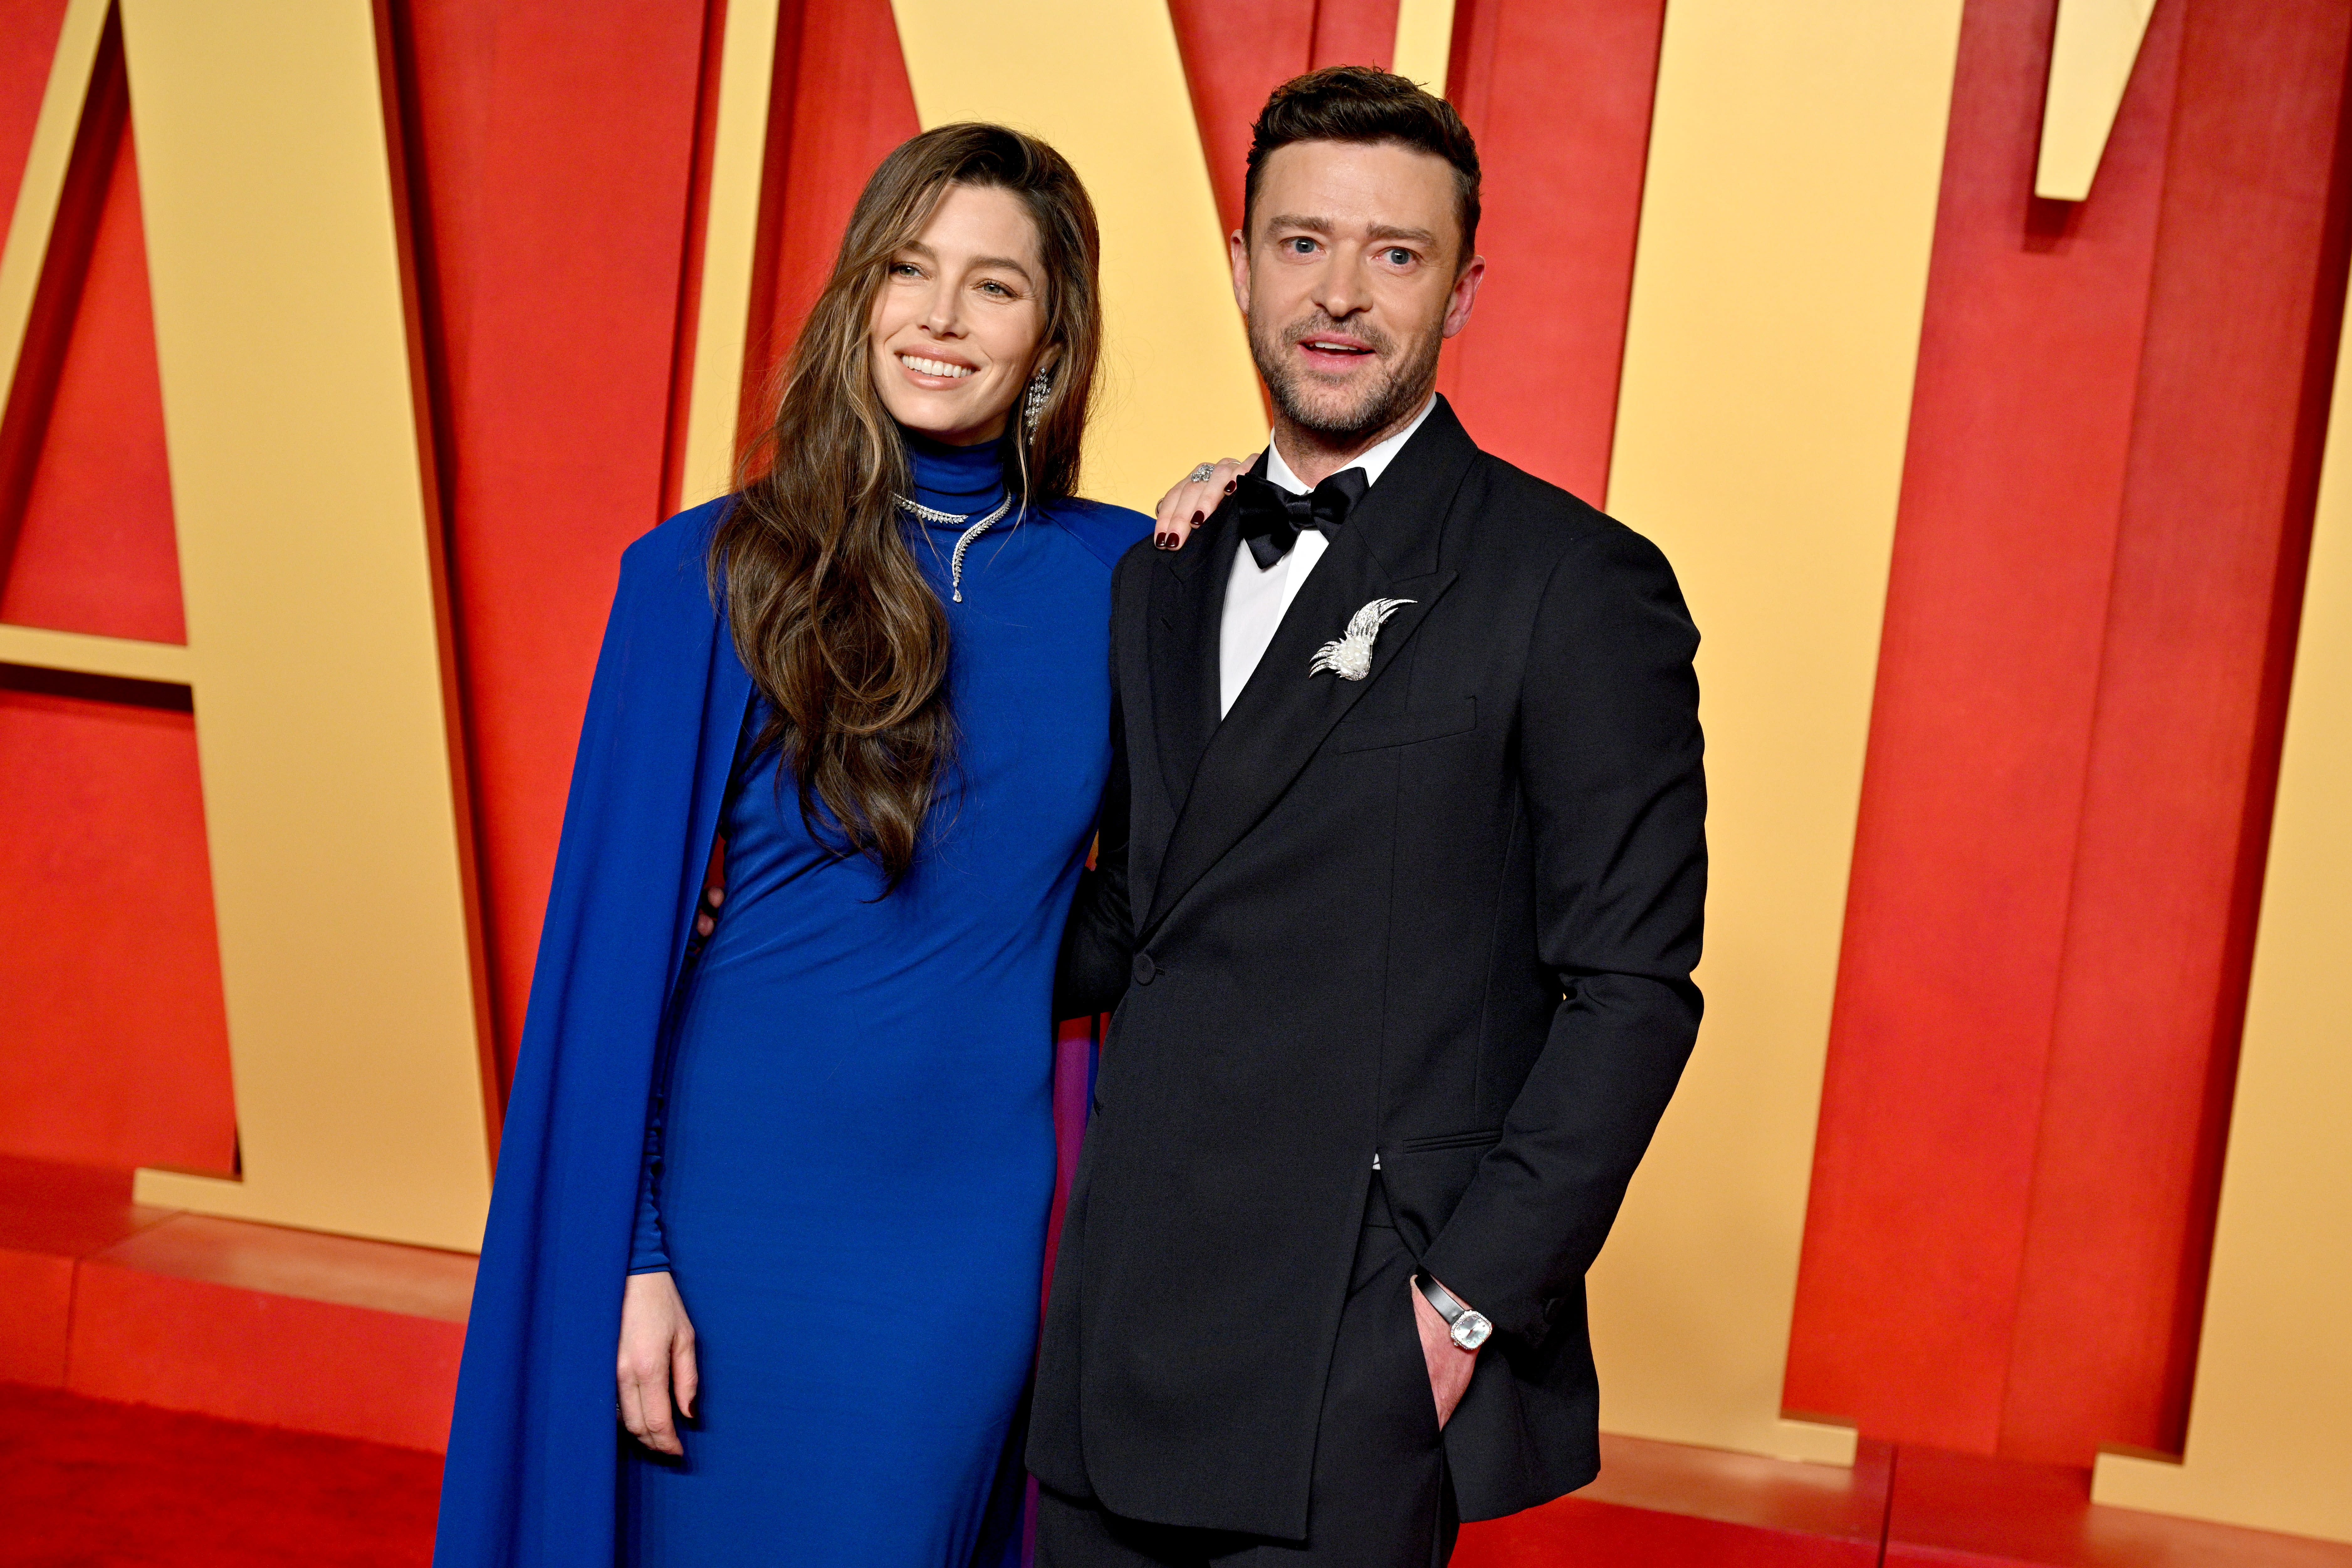 Jessica Biel Opens Up About Justin Timberlake Marriage: ‘Constantly Trying to Find the Balance’